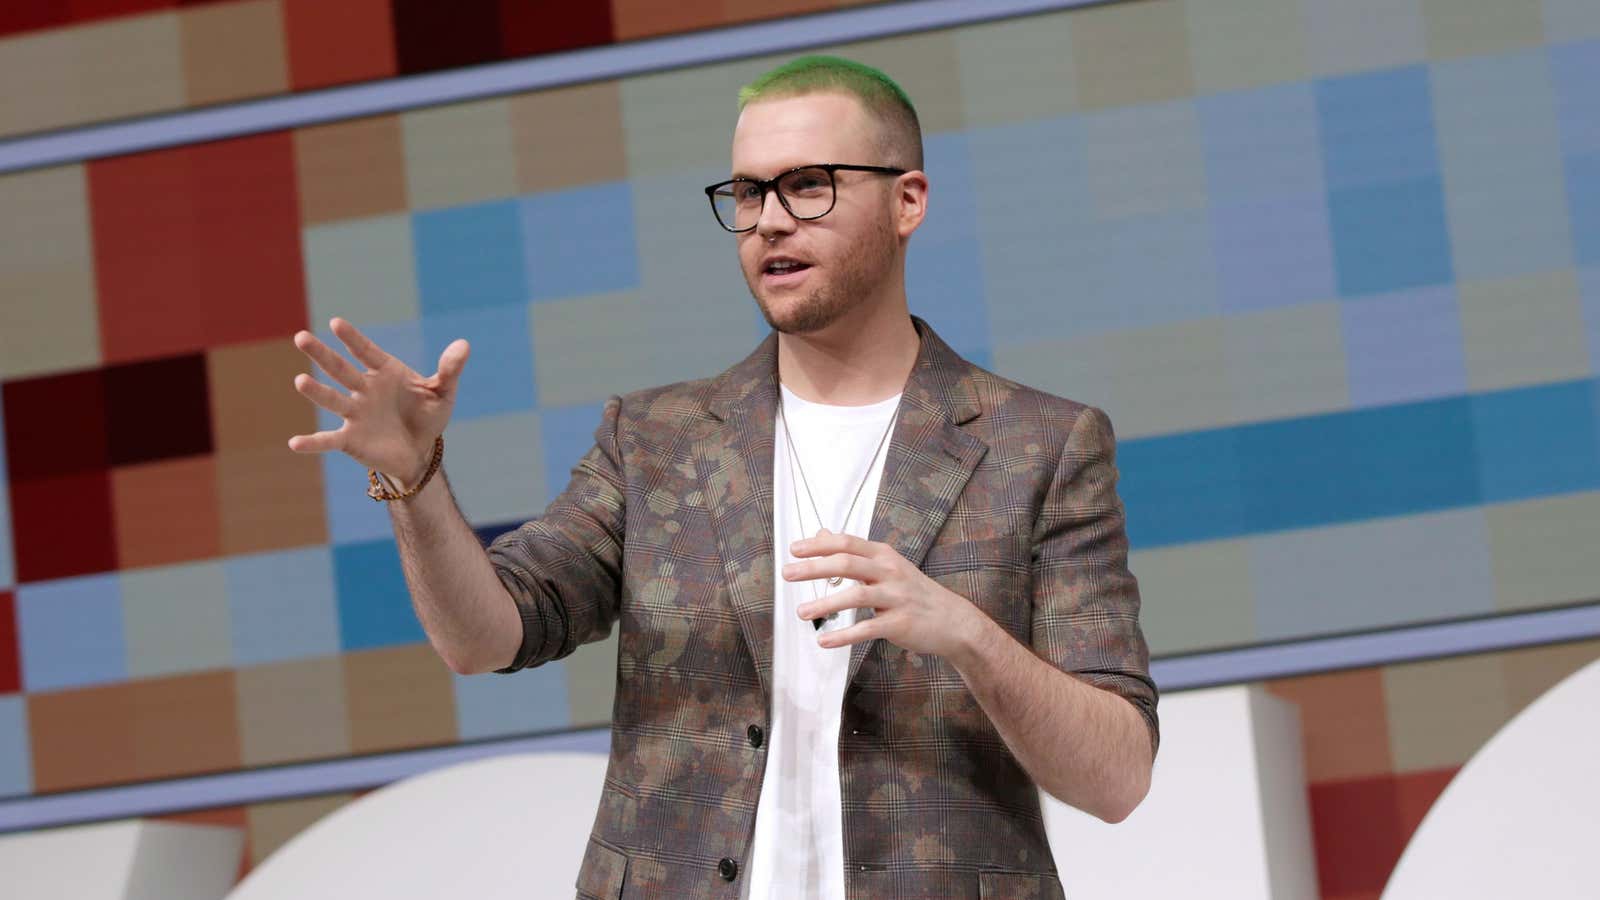 Christopher Wylie says fashion plays an outsize role in the culture wars.